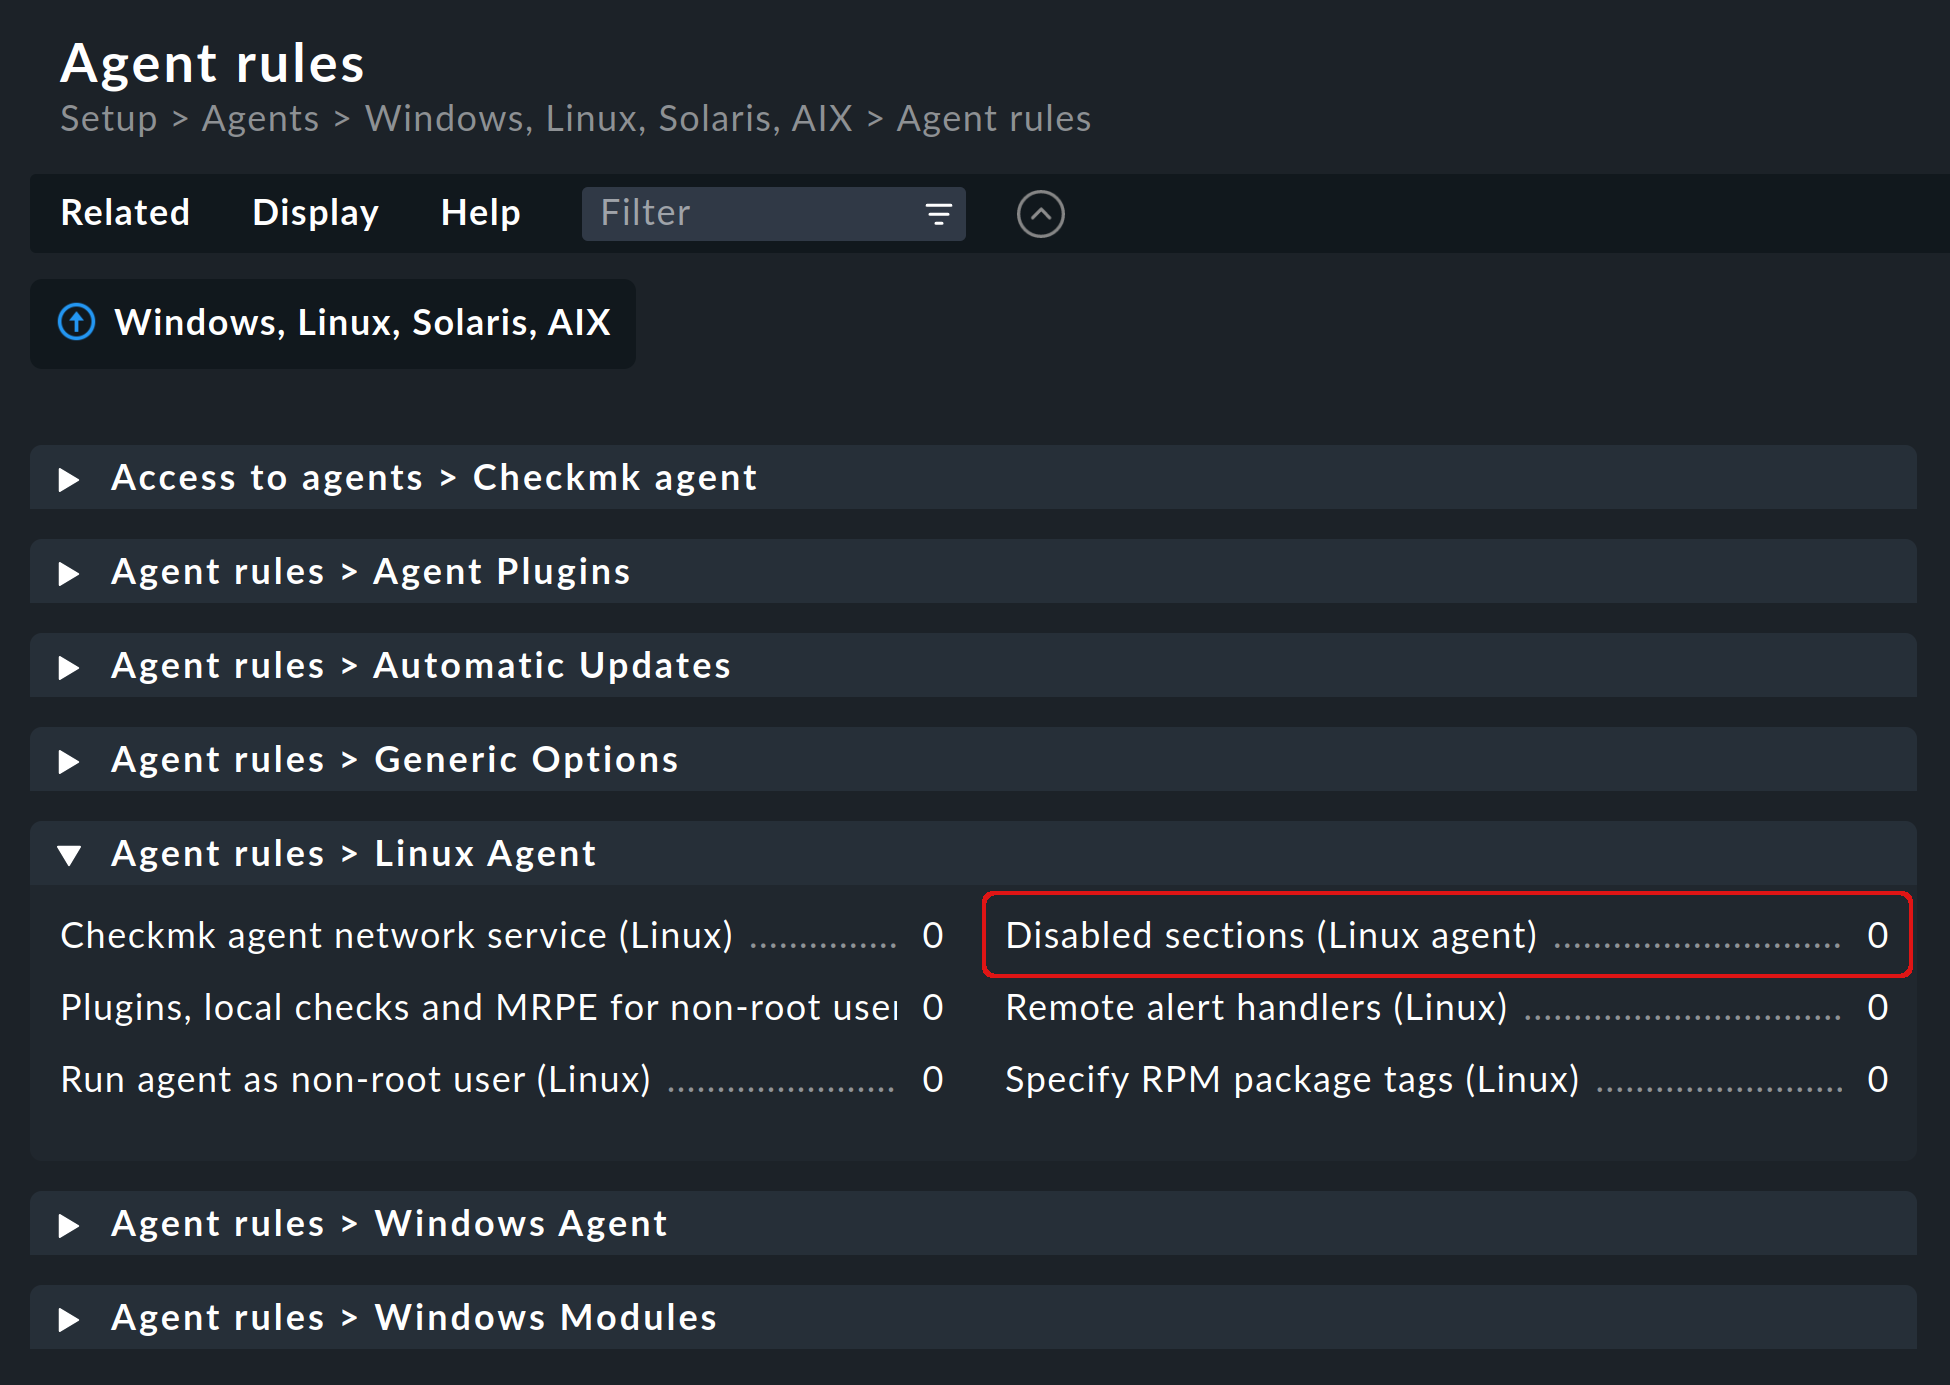 List of agent rules for the Linux agent.